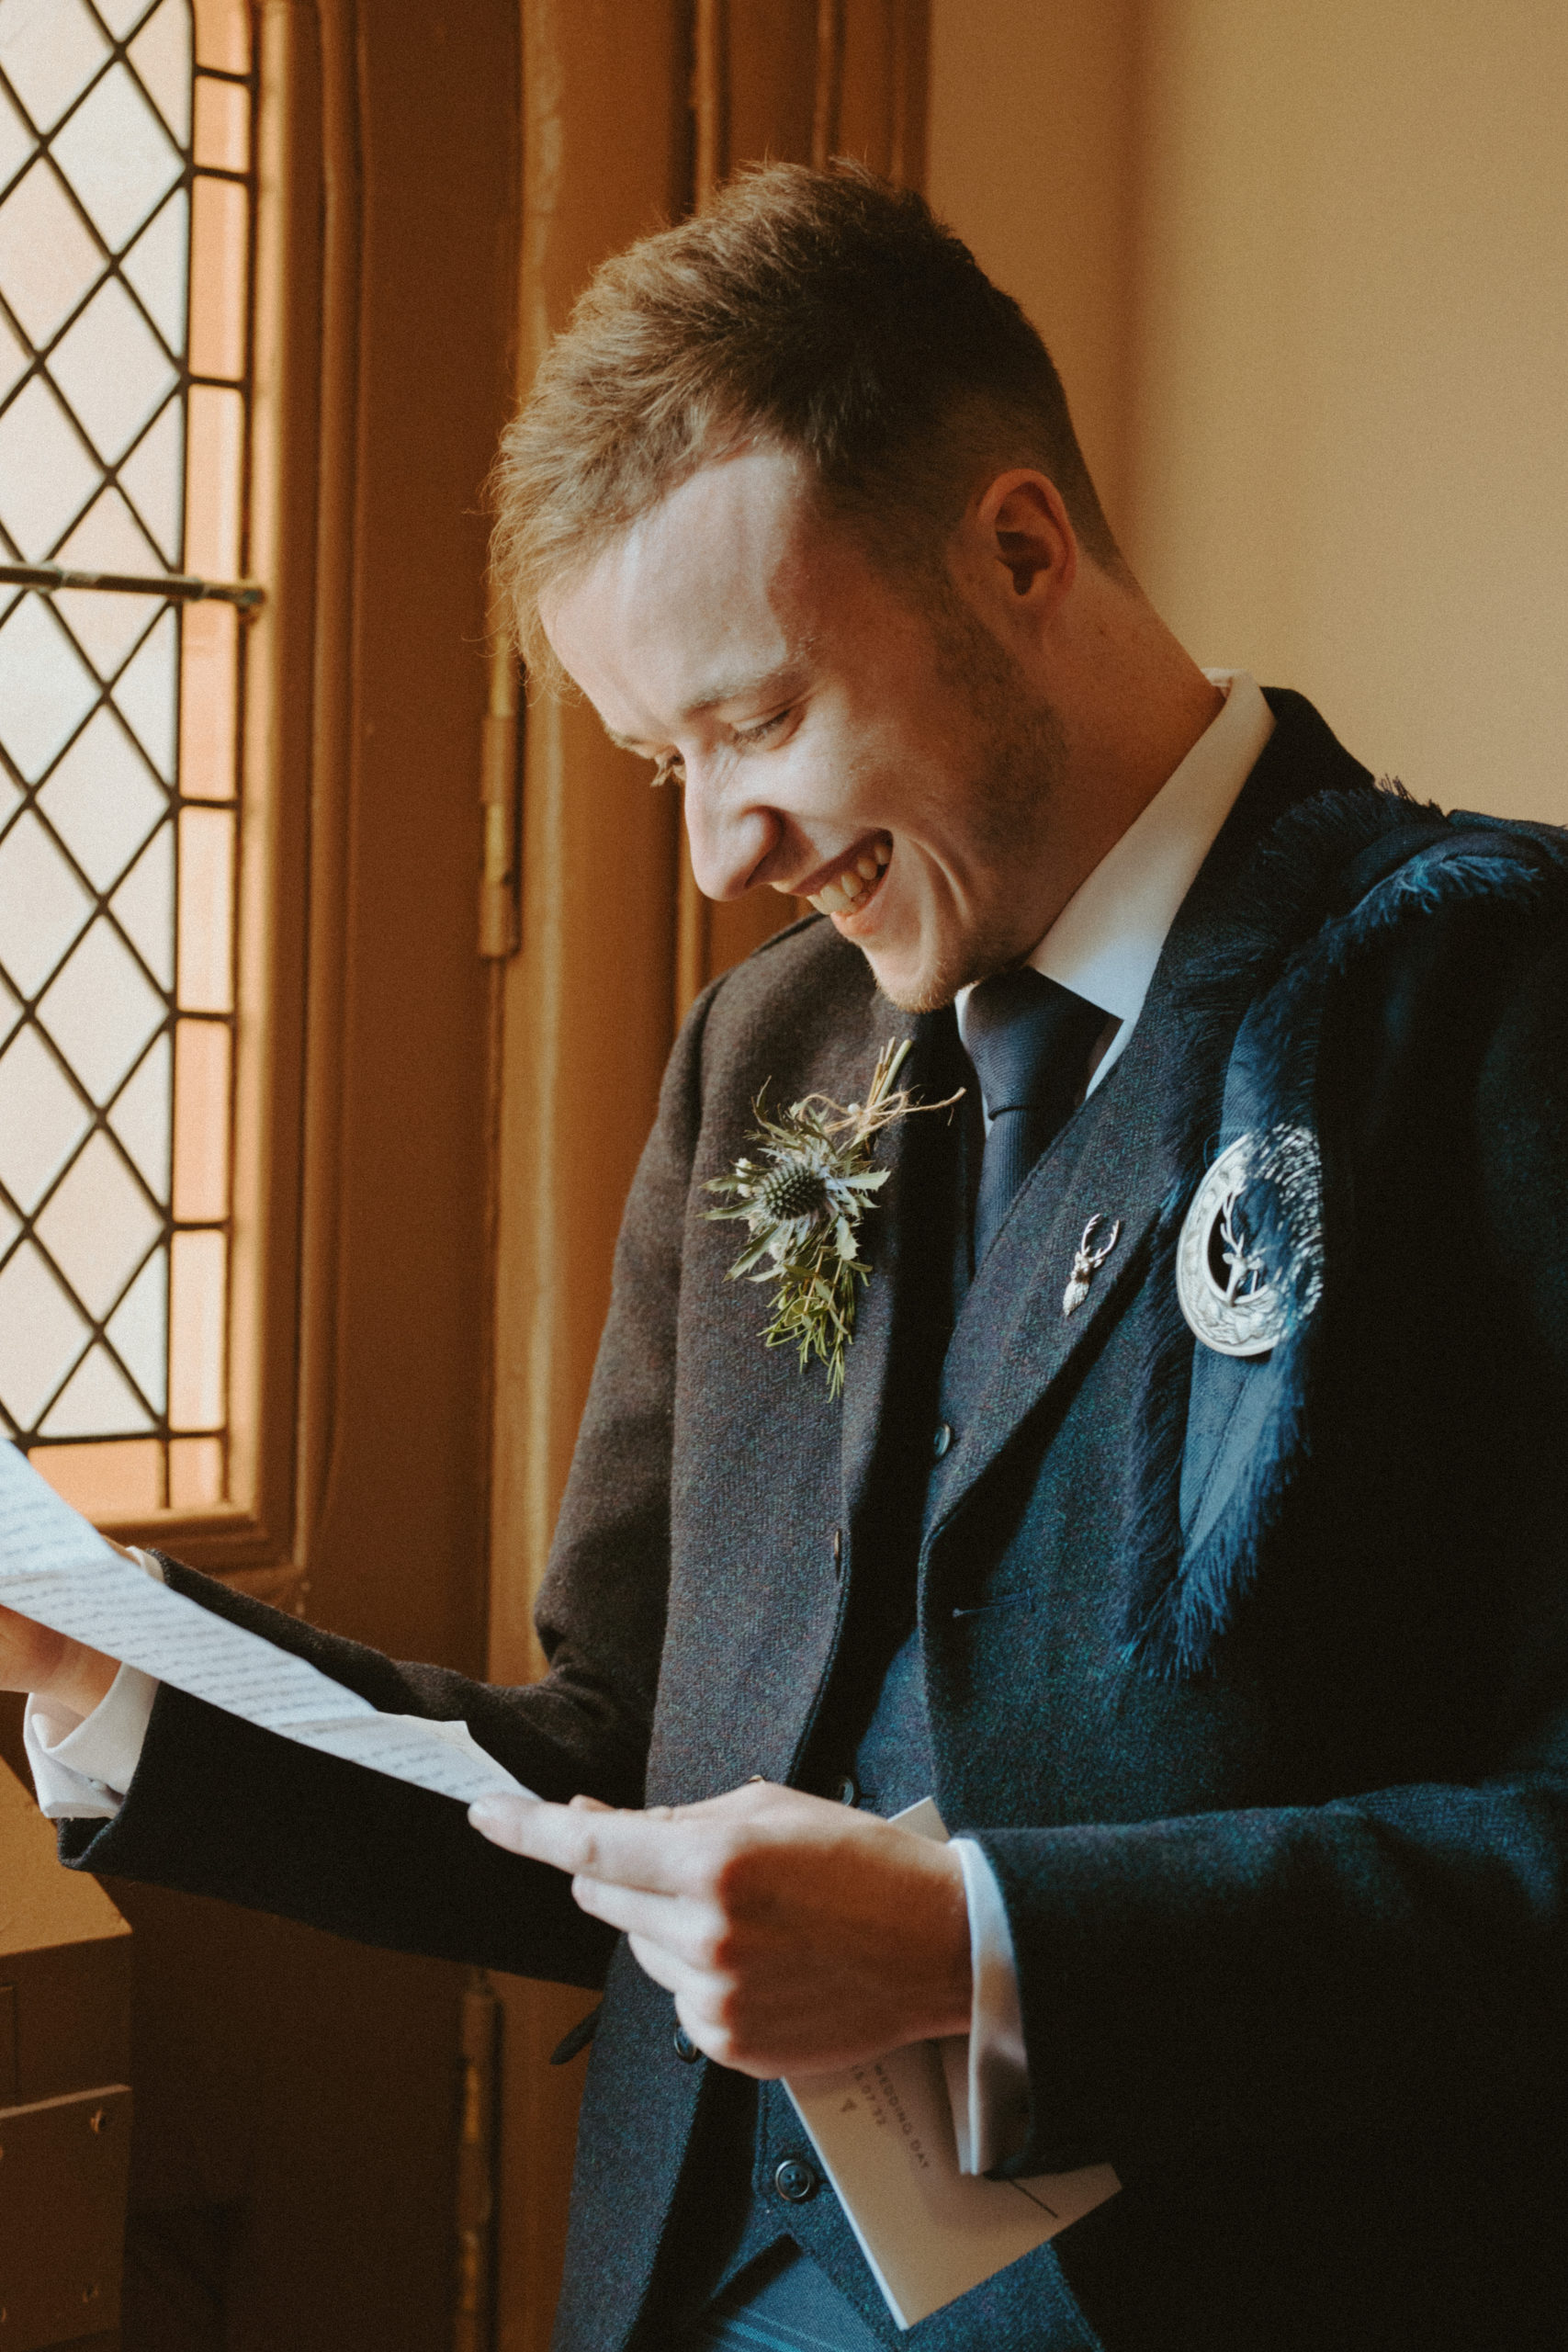 the groom smiling as he reads a letter